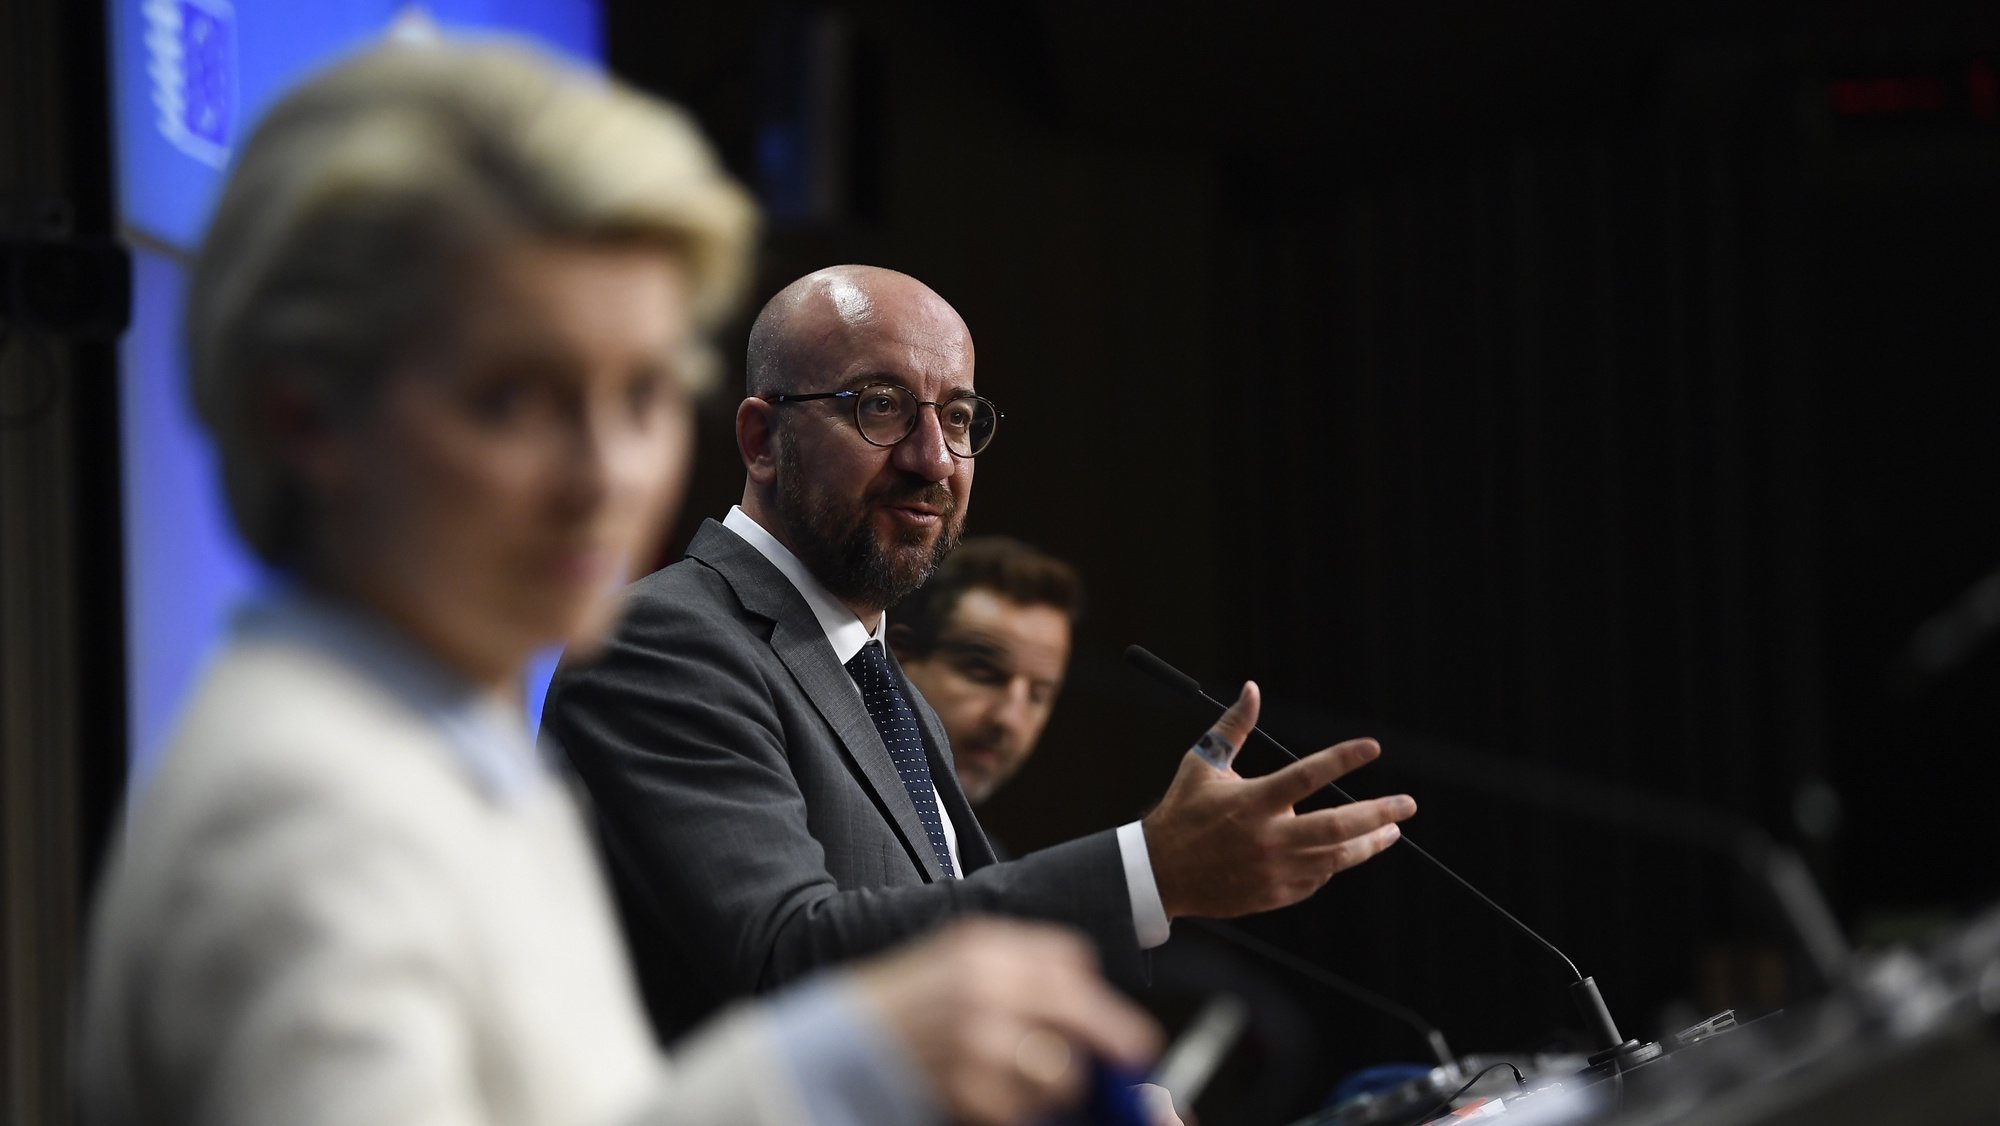 epa09225963 President of the European Commission Ursula von der Leyen (L) looks on as President of the European Council Charles Michel (R) speaks during a press conference at the EU summit at the European Council building in Brussels, Belgium, 24 May 2021. European Union leaders will take part in a two day in-person meeting to discuss the coronavirus pandemic, climate change and Russia.  EPA/JOHN THYS / POOL